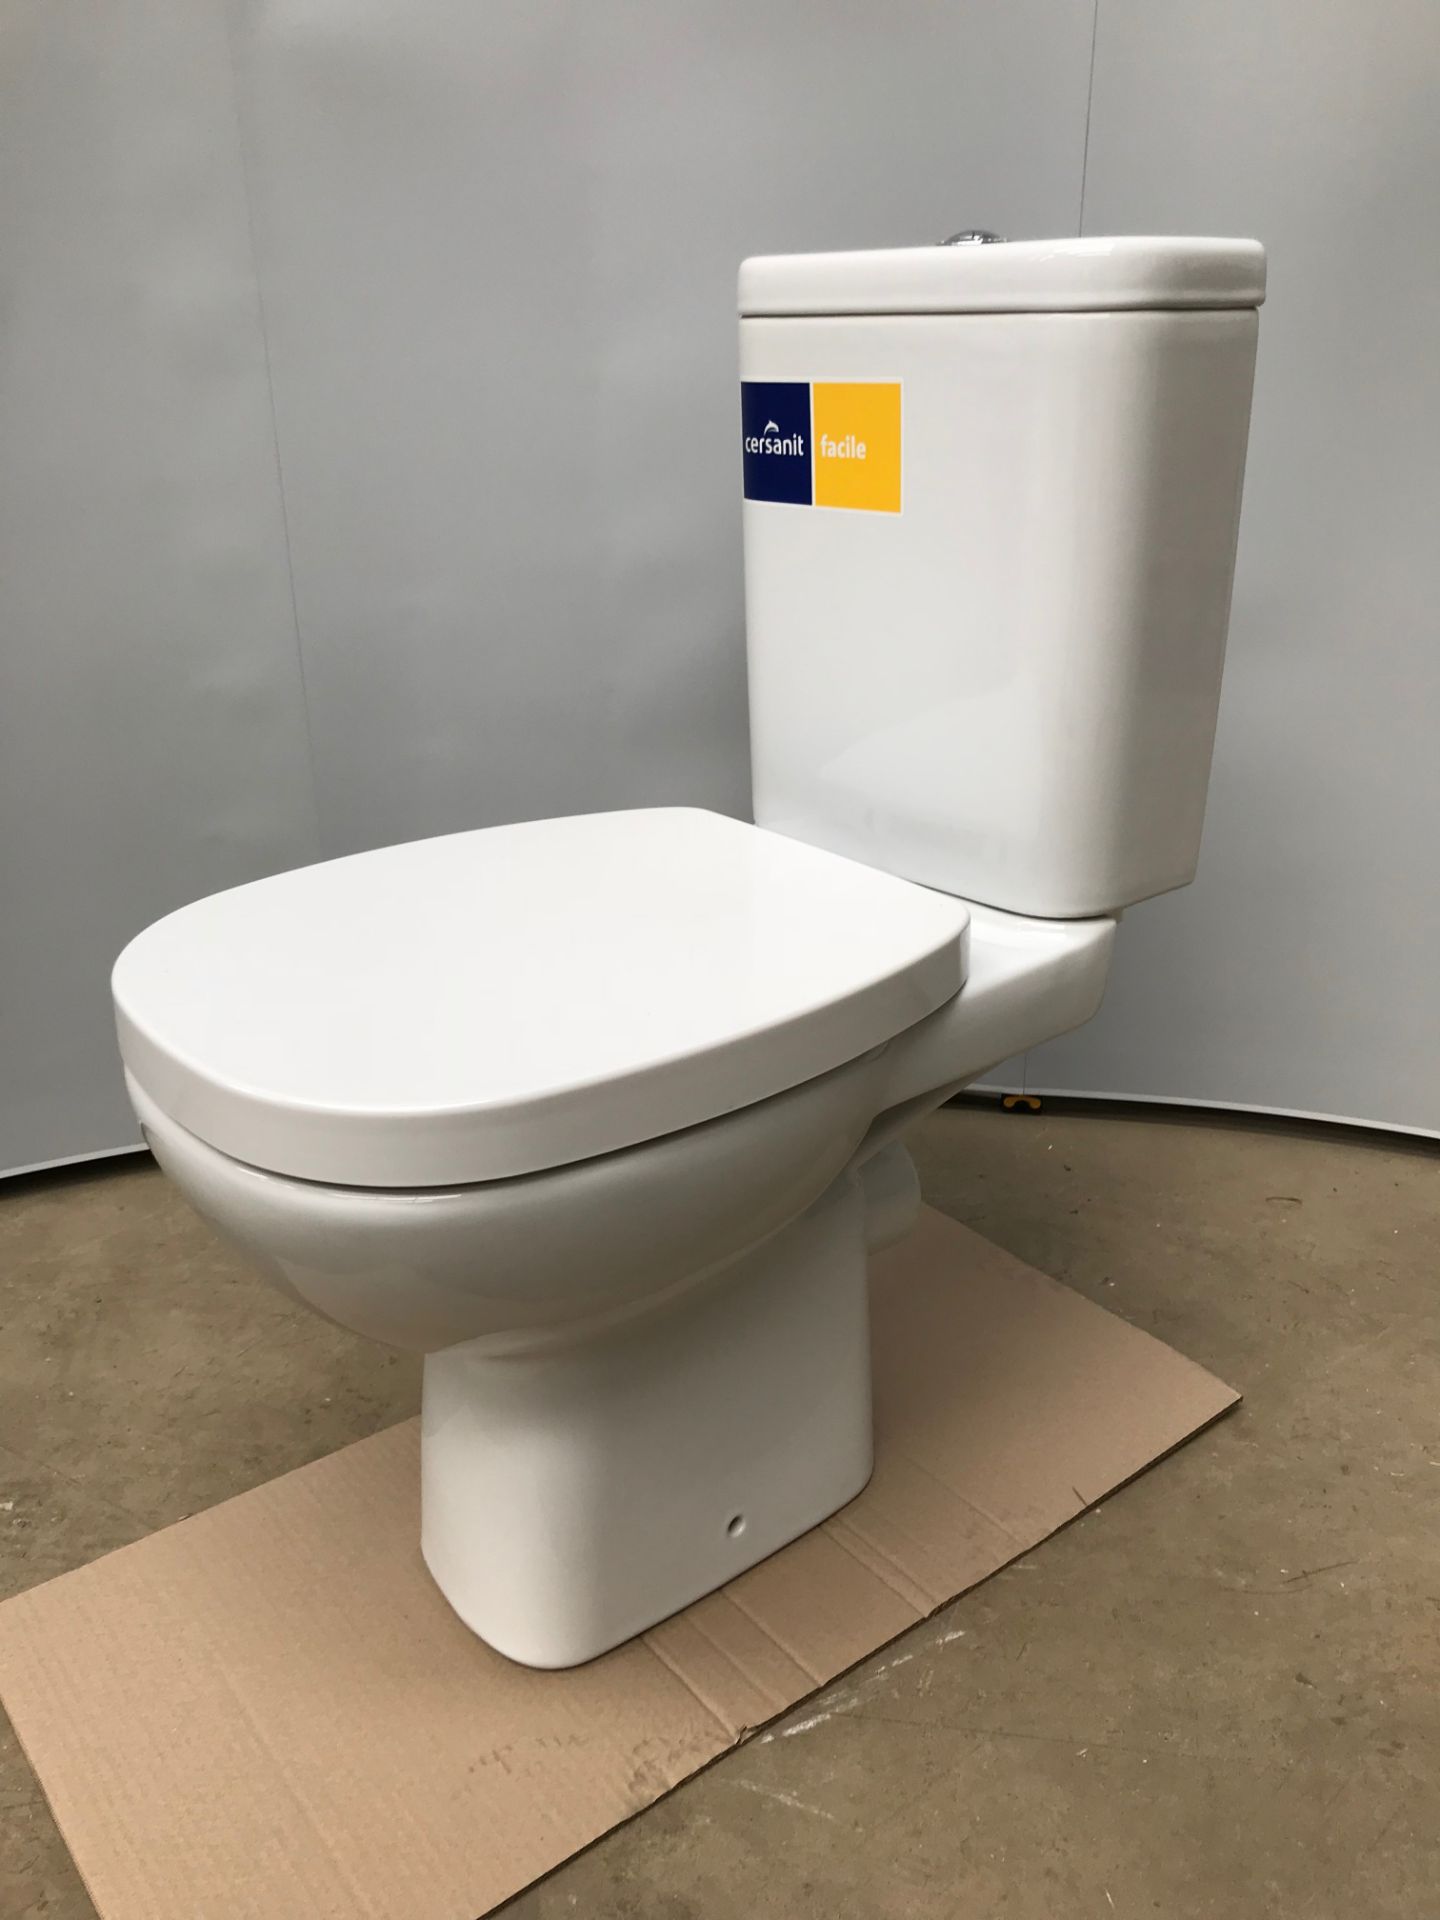 Pallet of 6 x Close Couple Toilet, with Cistern and full fitting kit - by Cersanit - Image 4 of 6